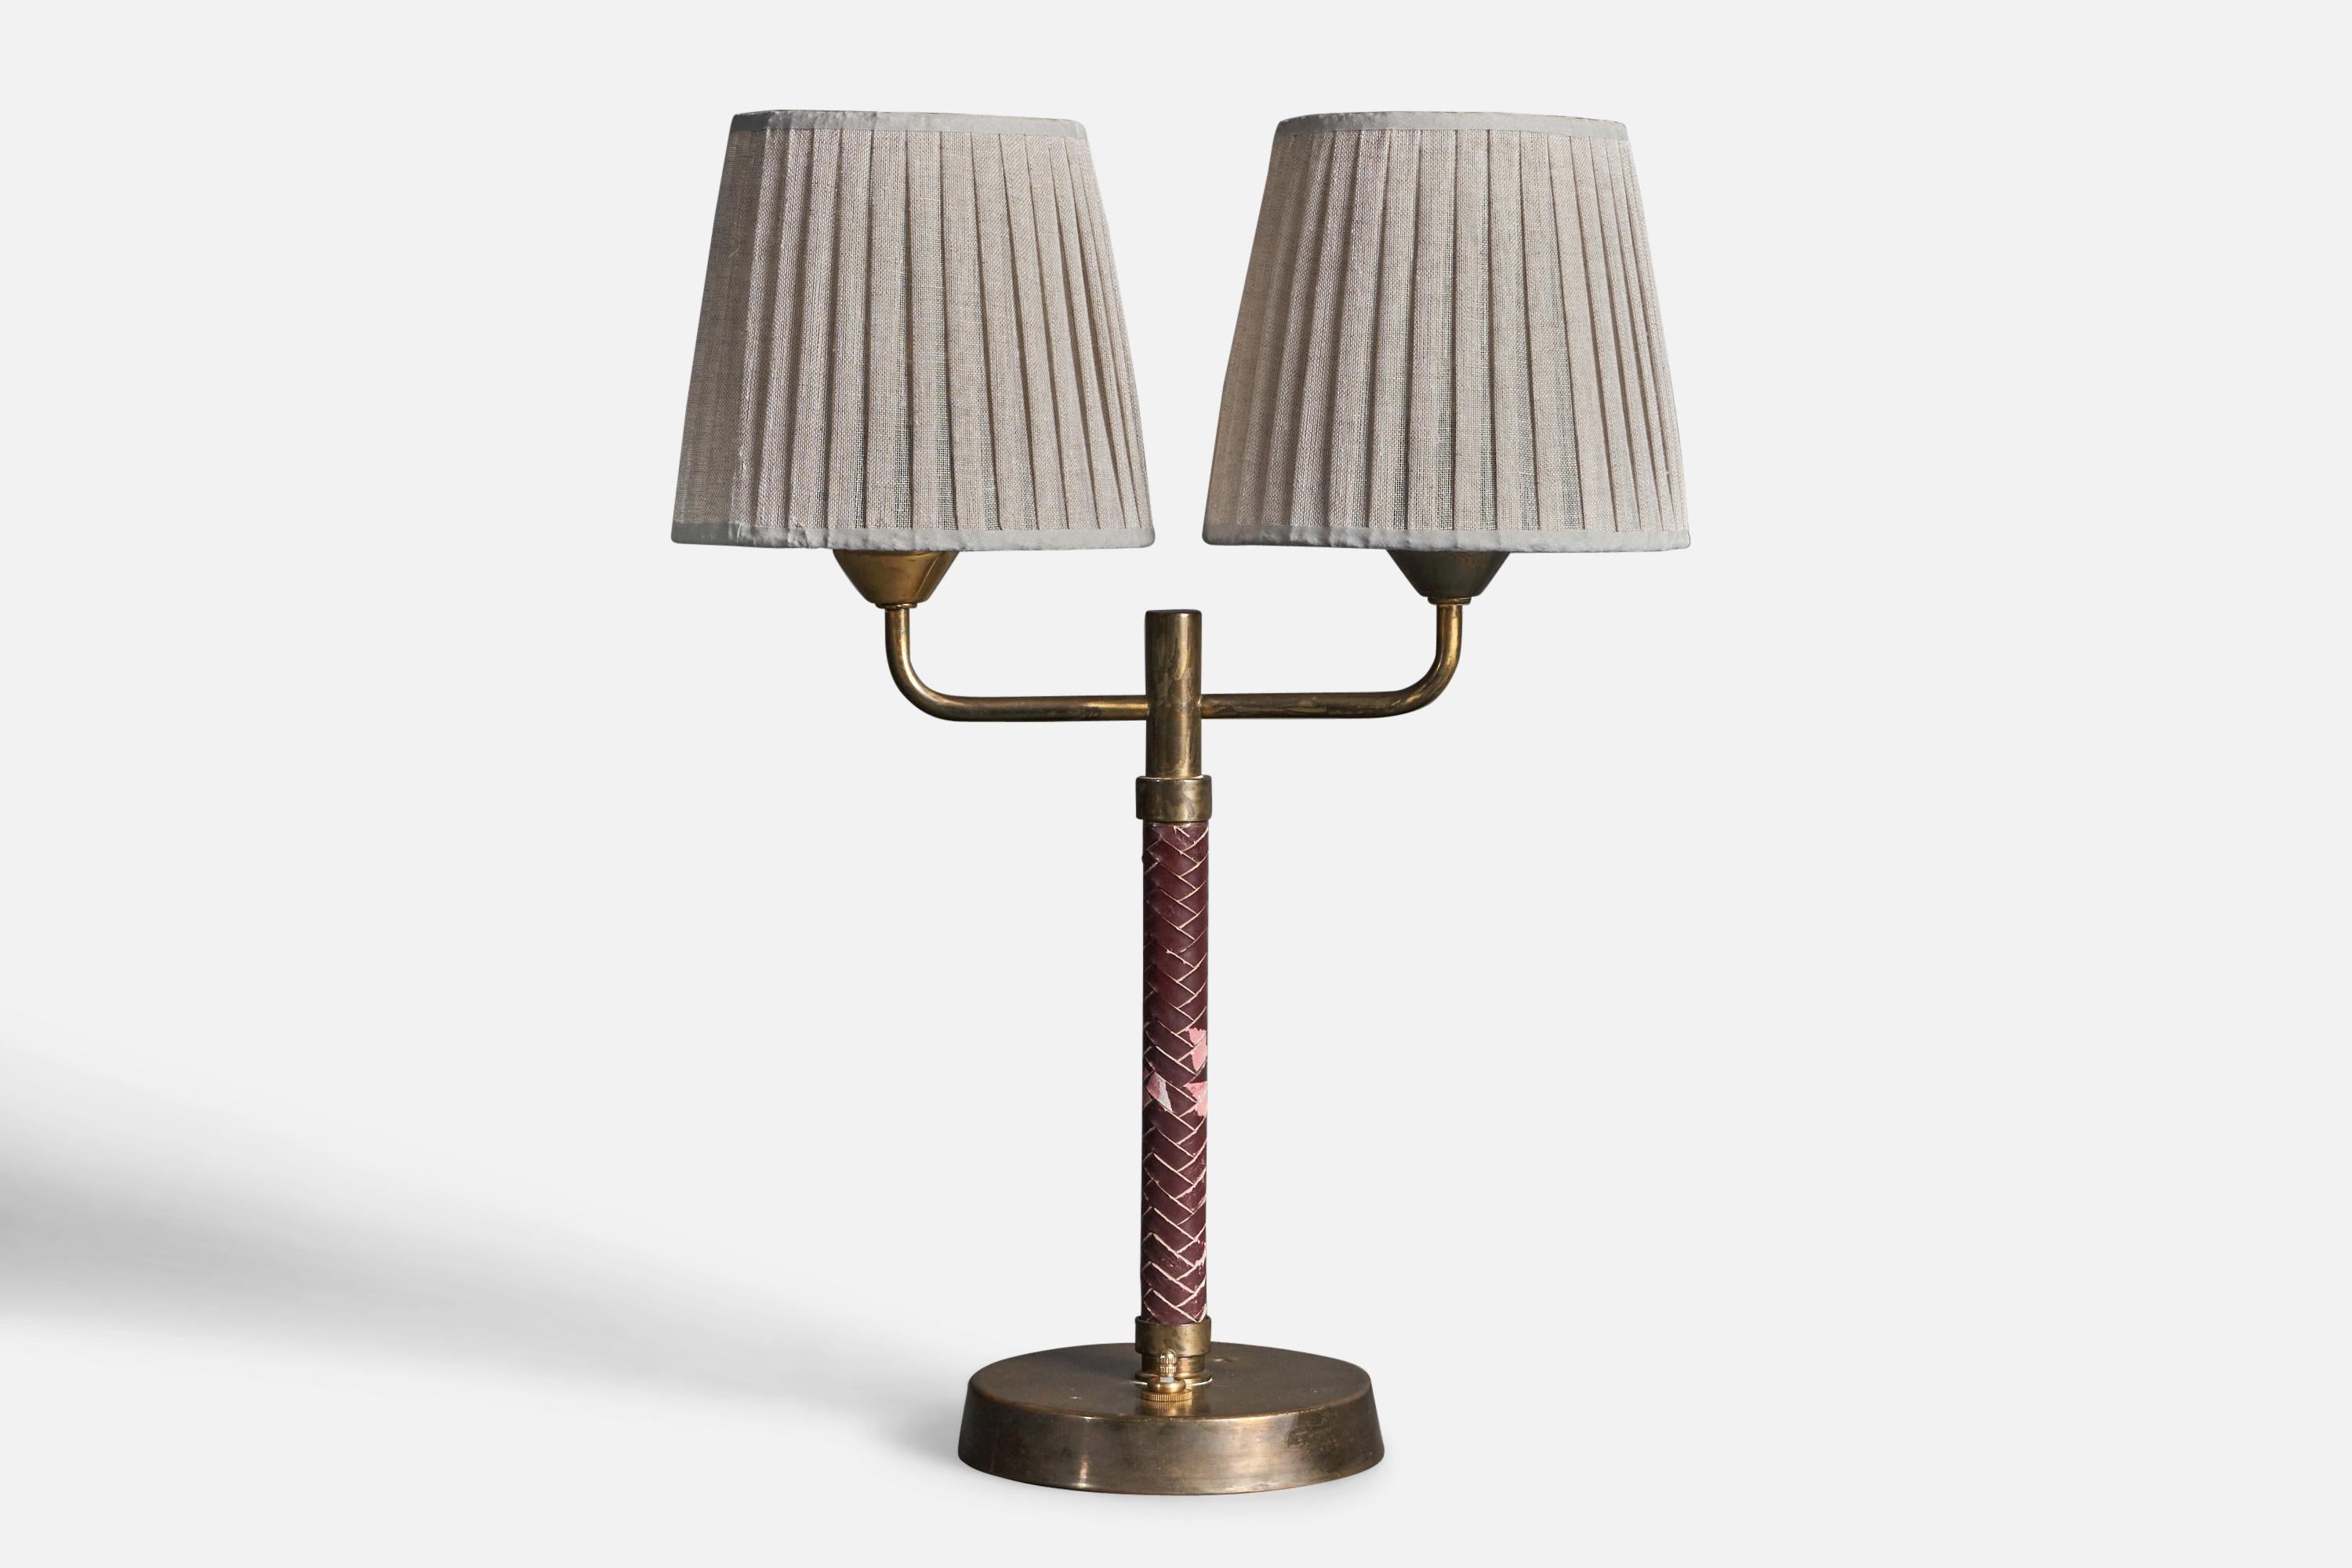 Swedish, Adjustable Two-Armed Table Lamp, Brass, Leather, Fabric, Sweden, 1940s For Sale 1